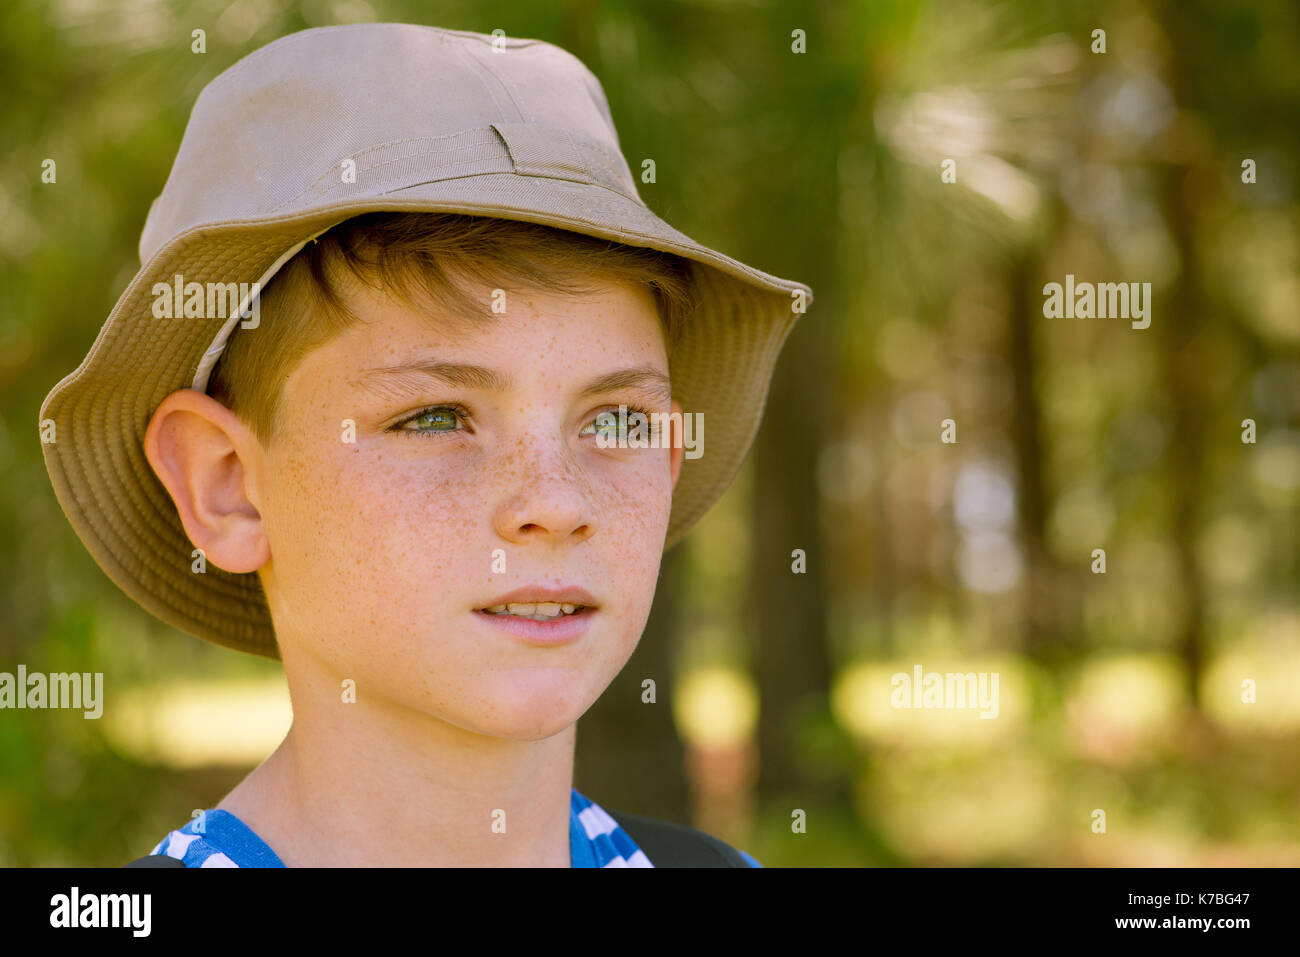 Preteen boy looking into distance Stock Photo